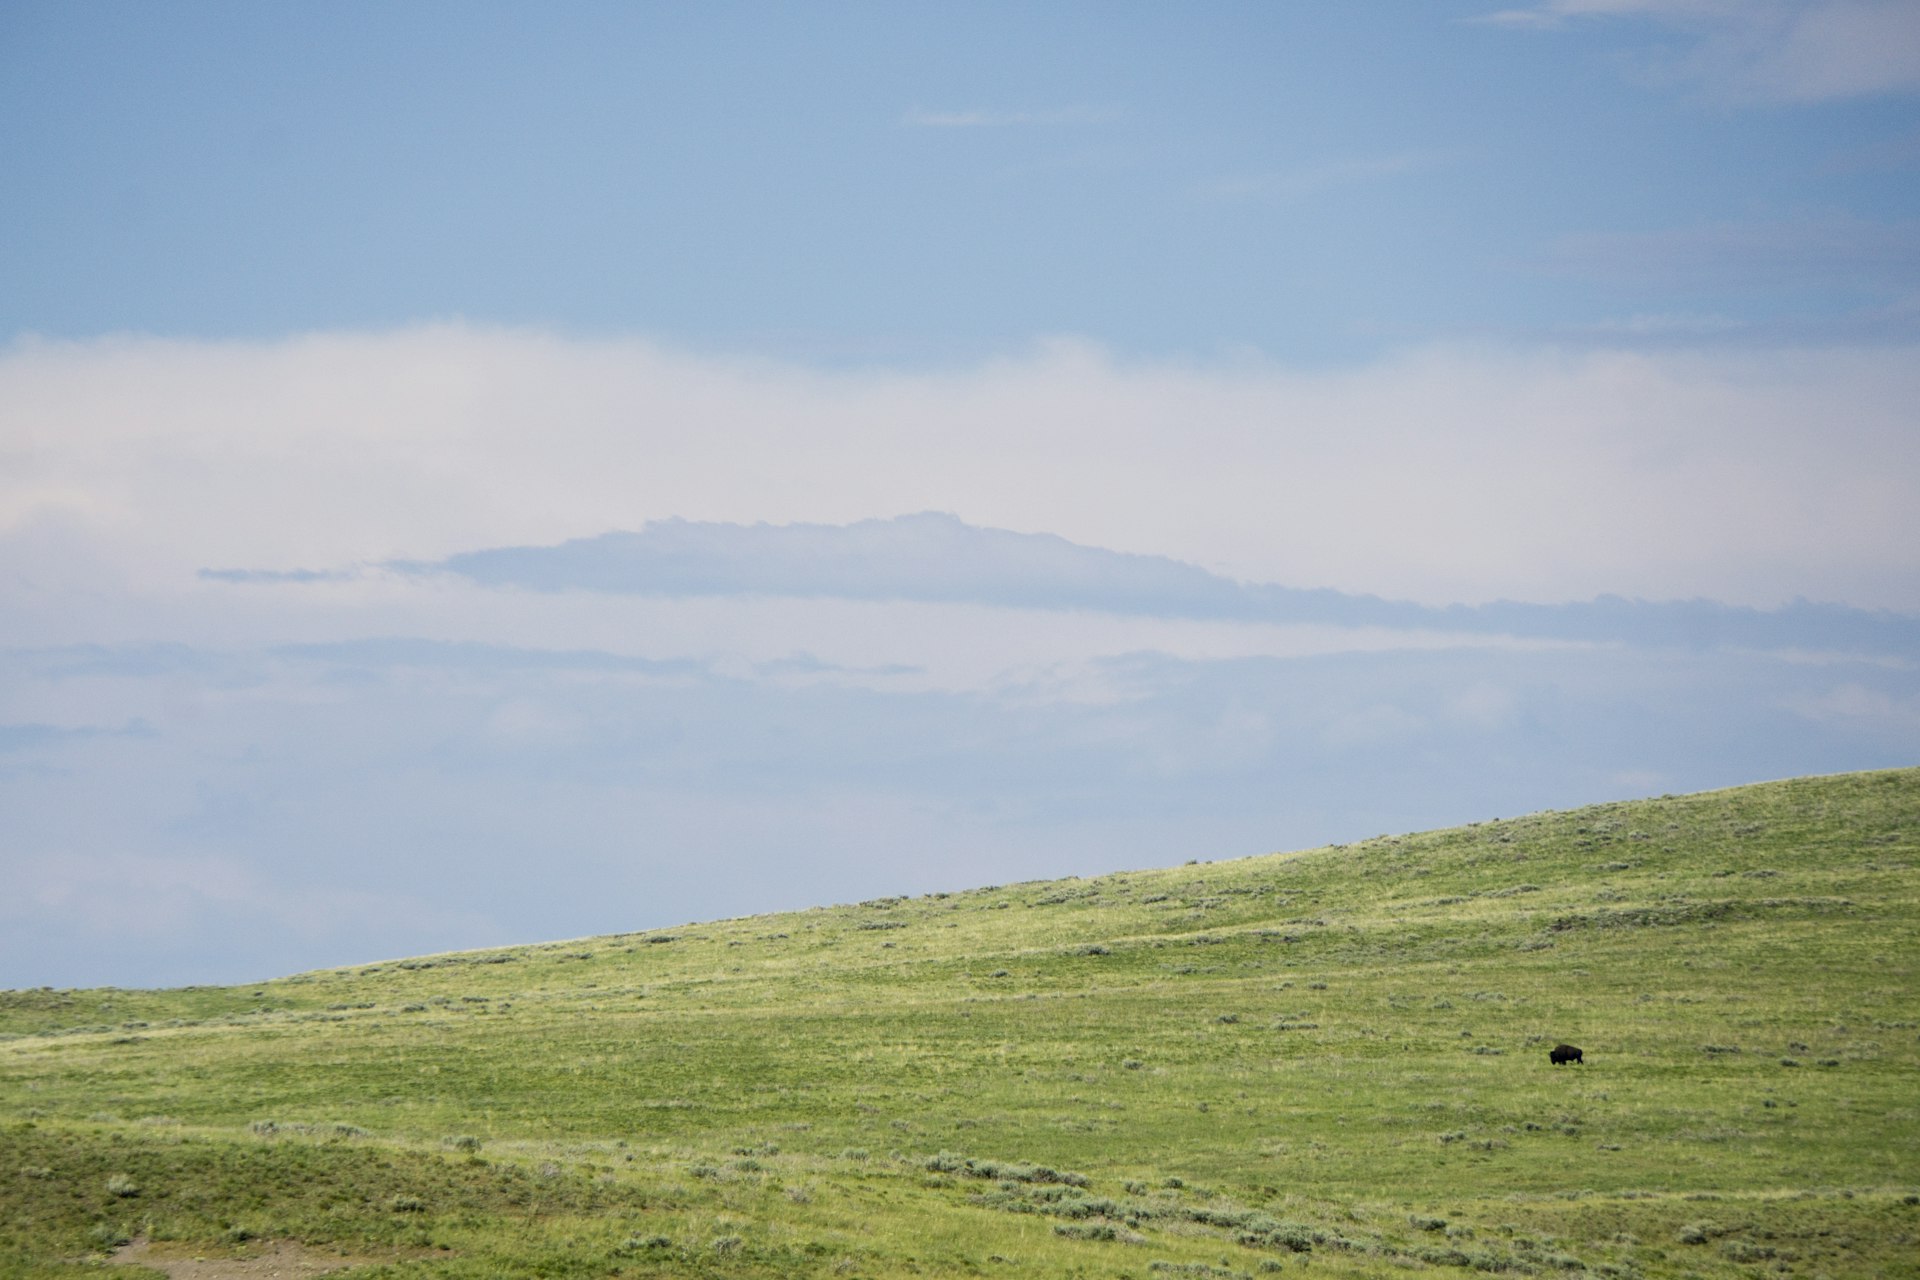 Bison in a field, Yellowstone National Park